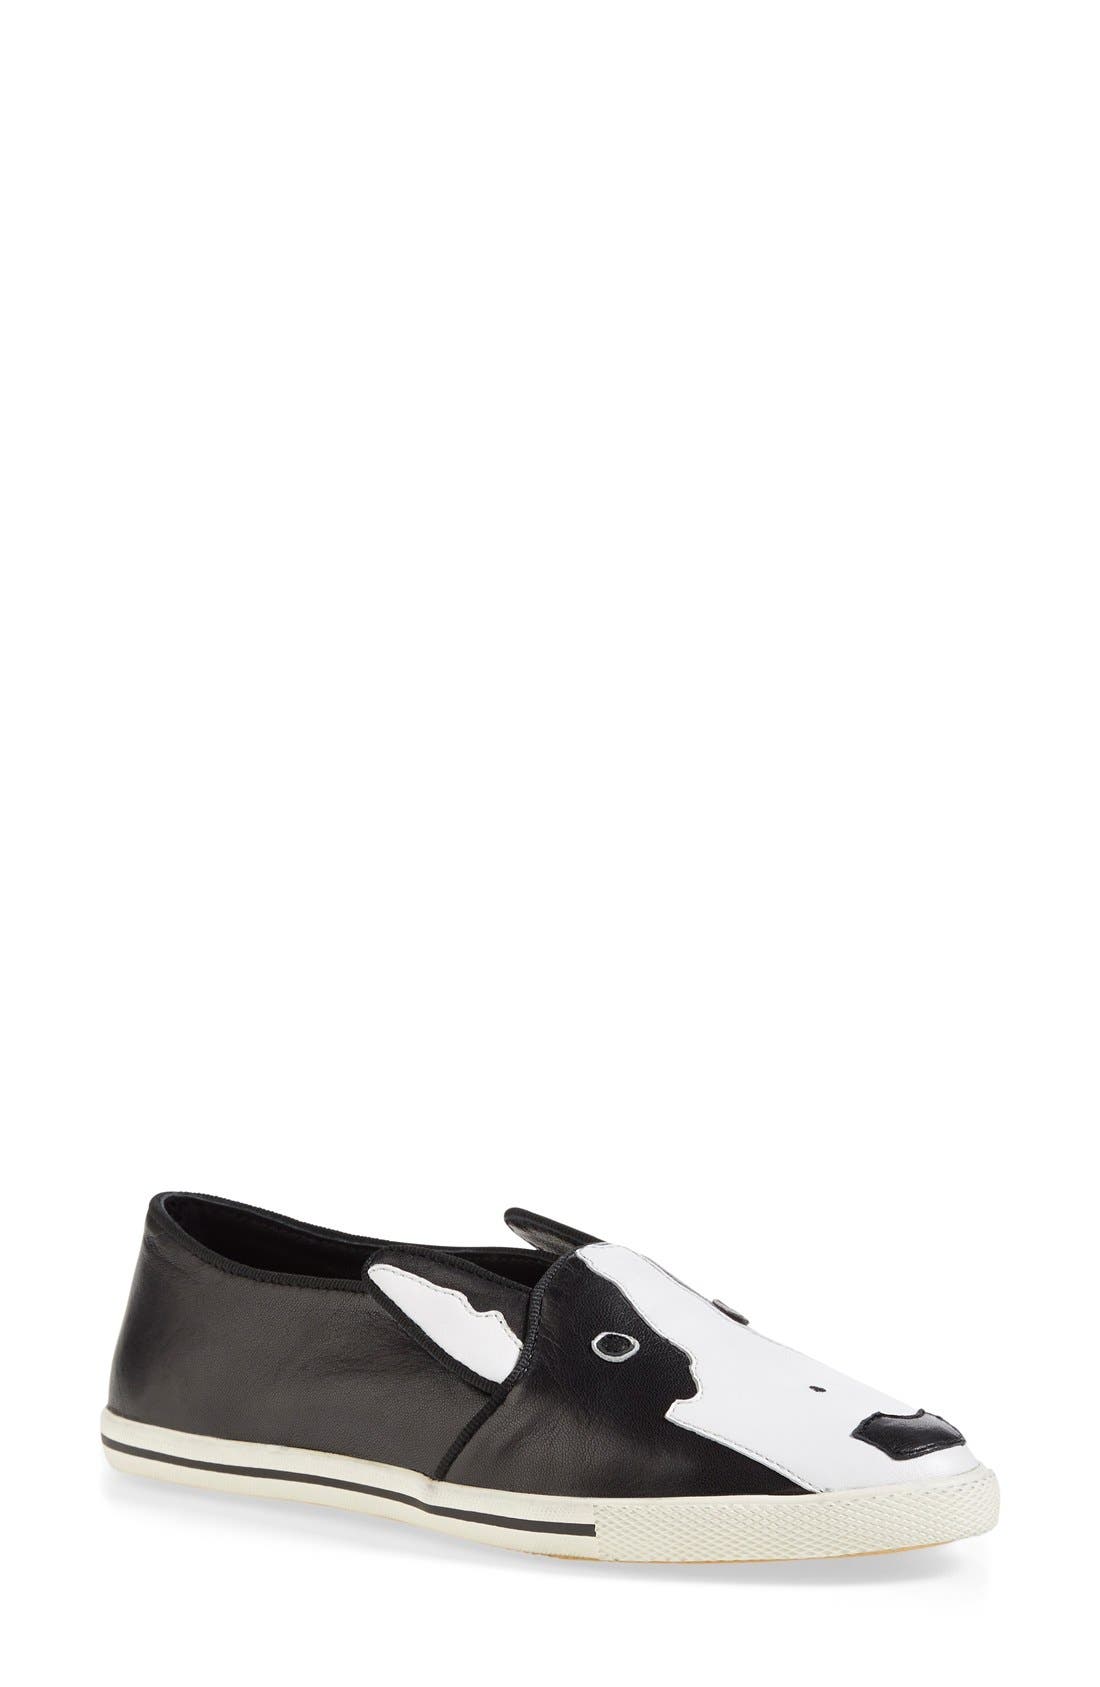 marc jacobs bull terrier shoes